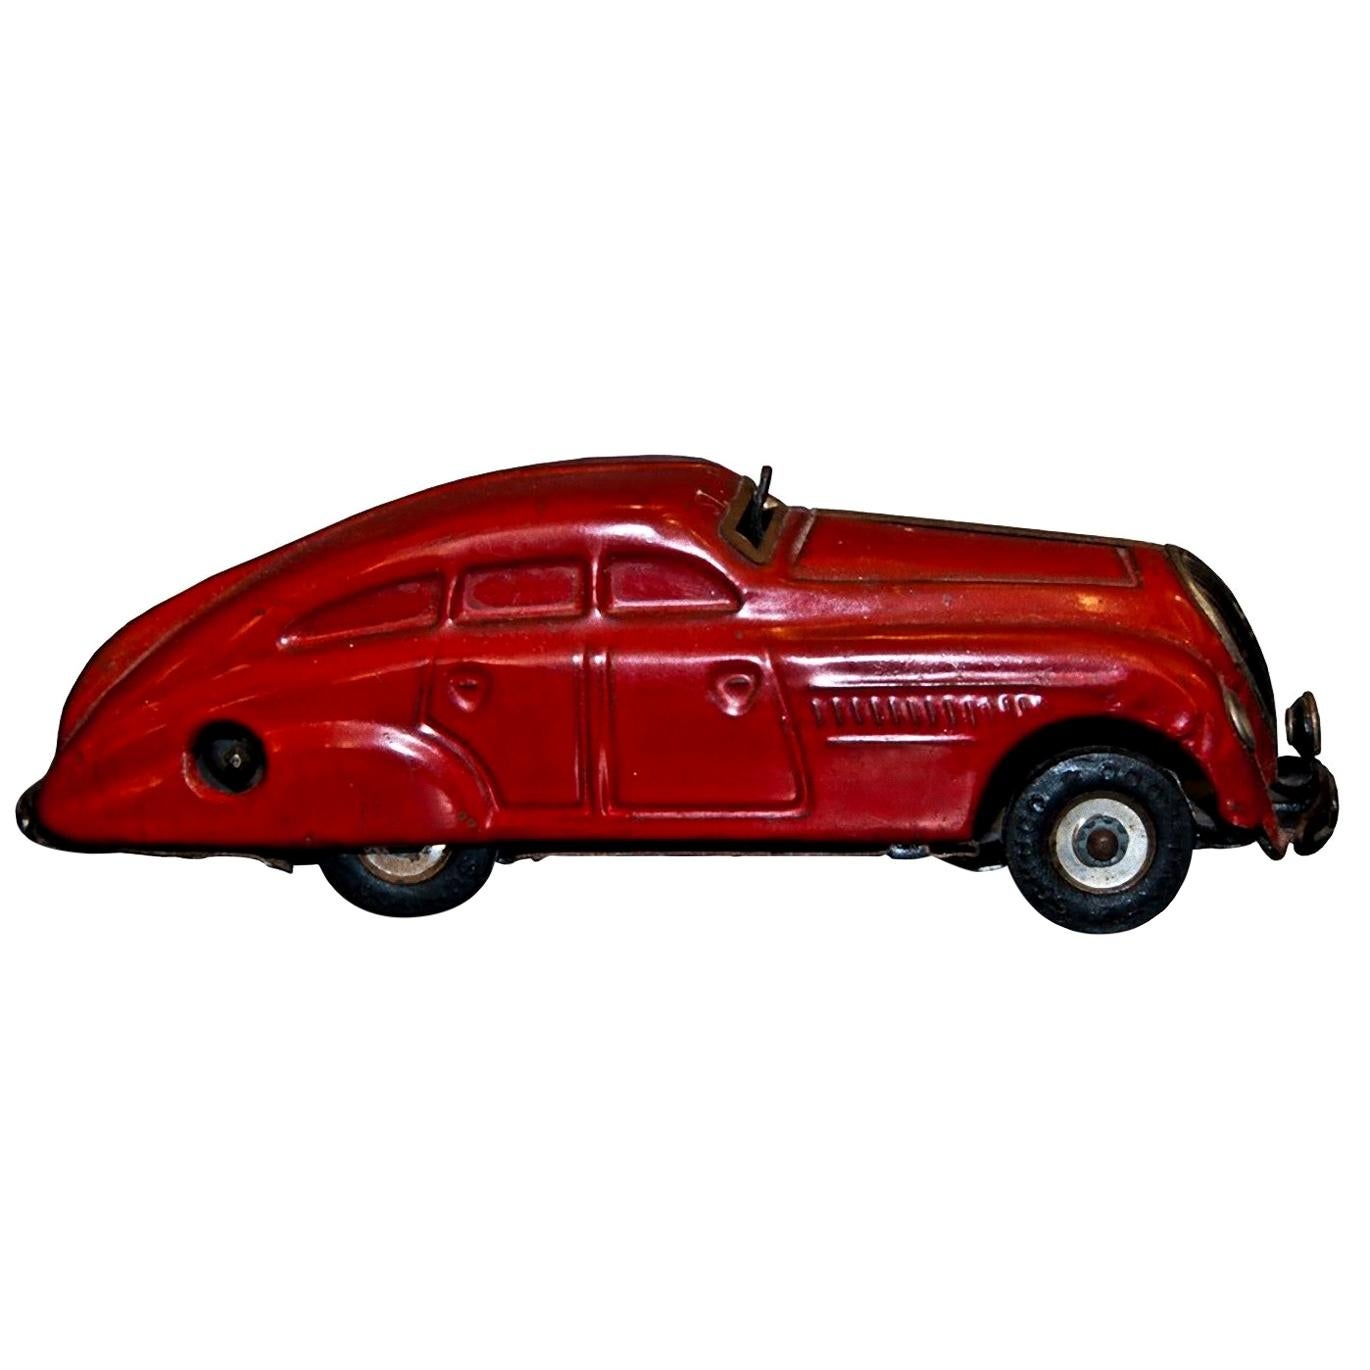 Vintage Toy, Schuco 1750 Car, Made in Germany, Mid-20th Century